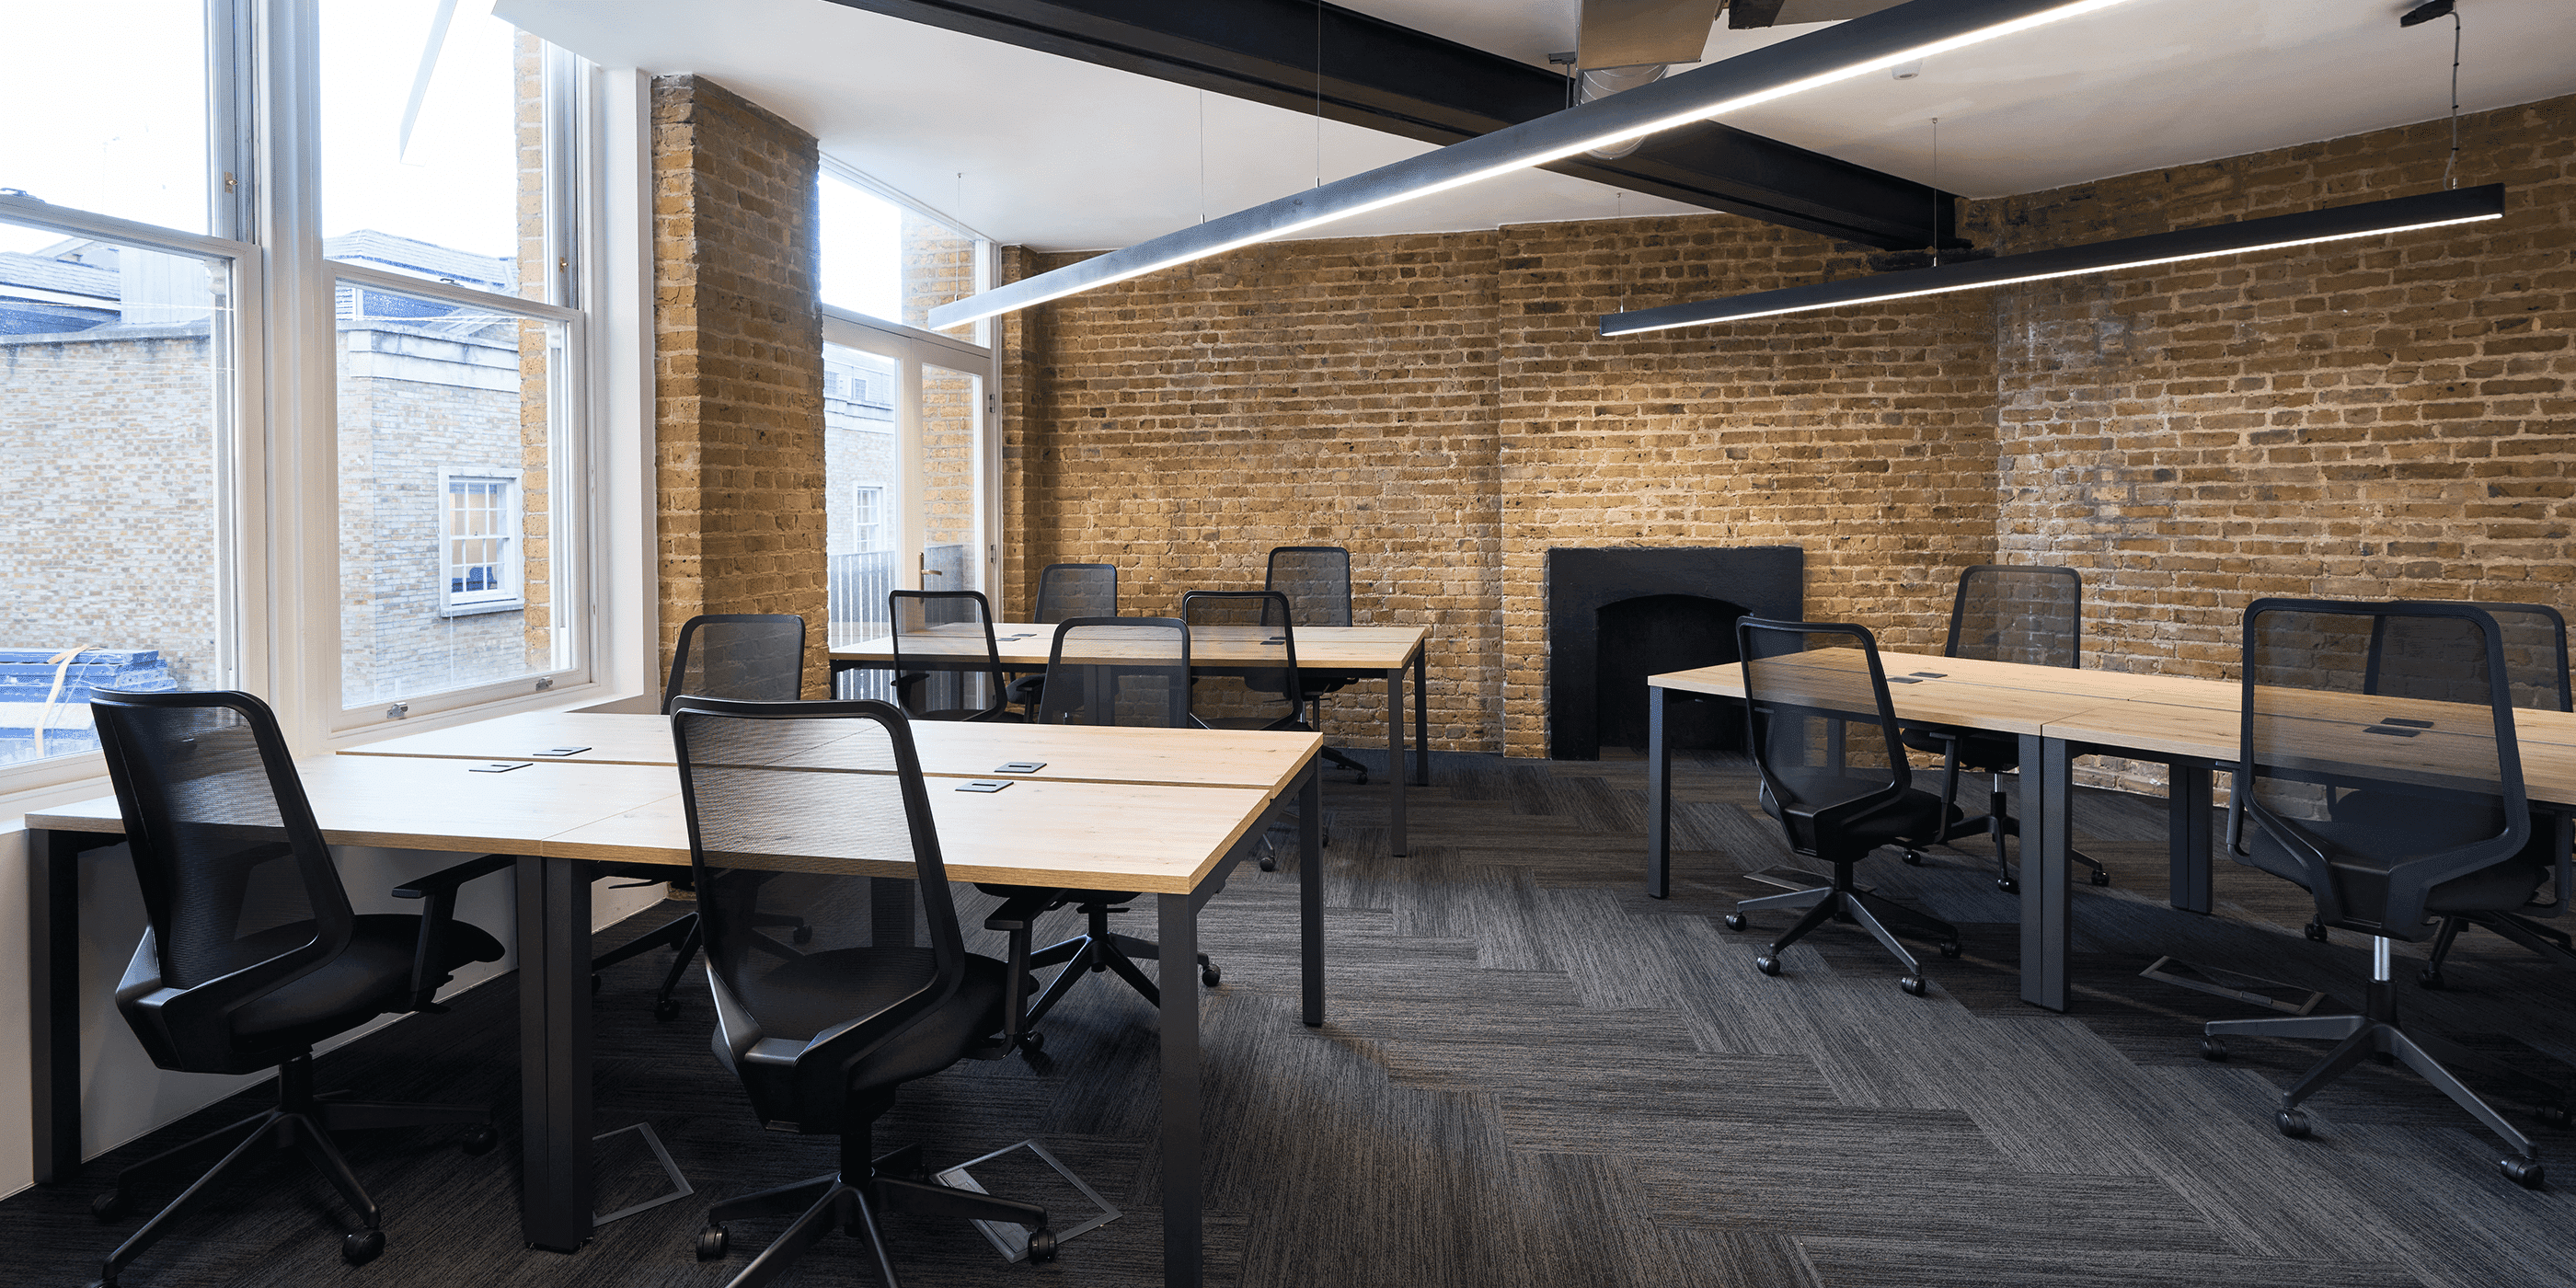 How To Choose A Startup Office Space: Design, Location & Layout 